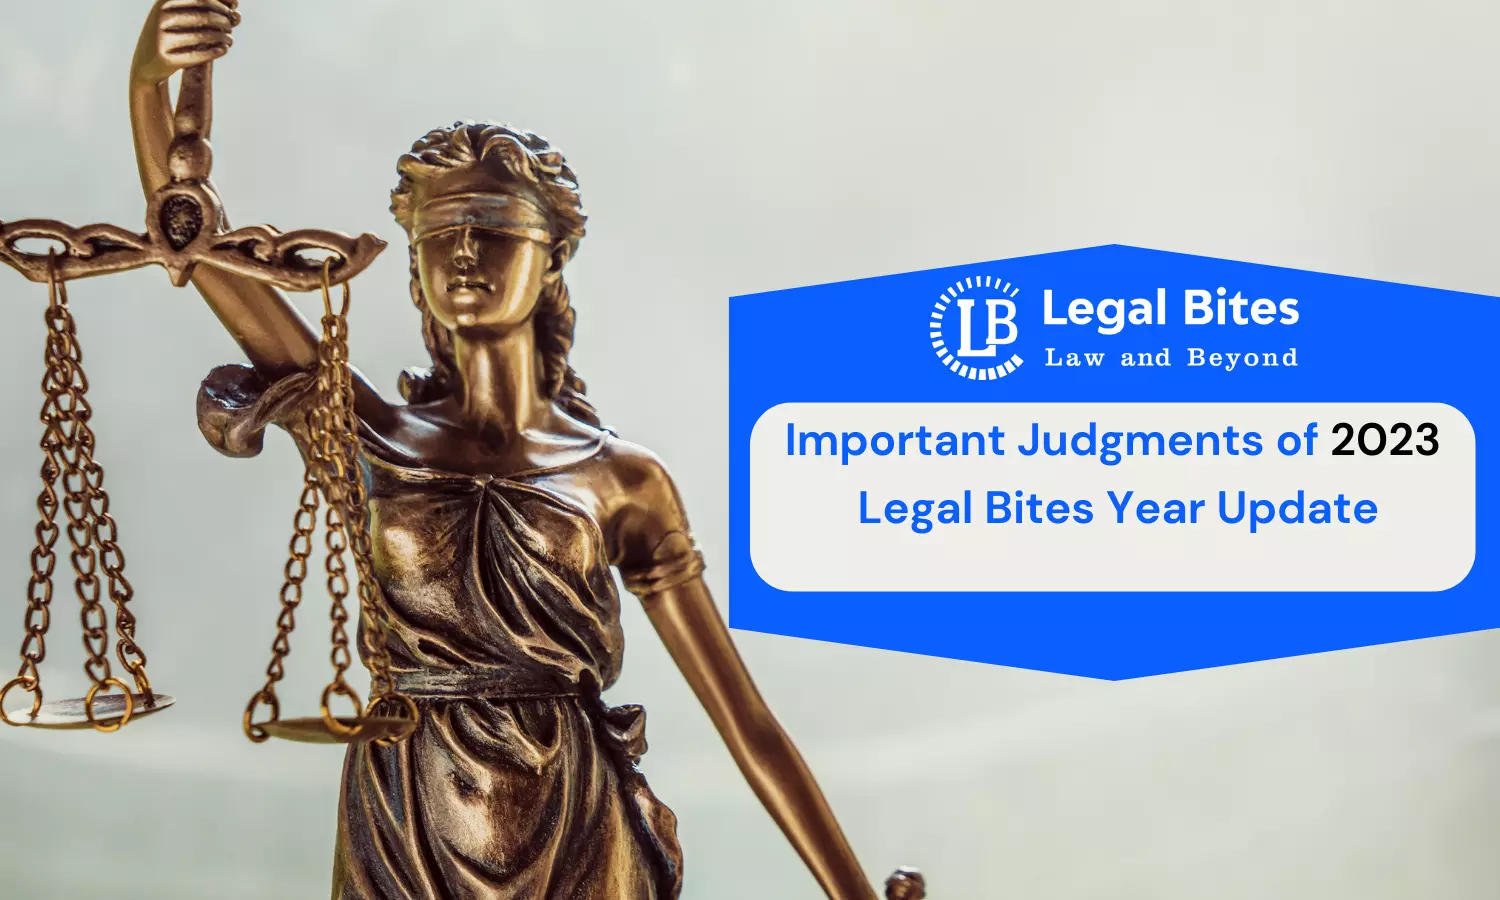 Important Judgments of 2023: Legal Bites Year Update